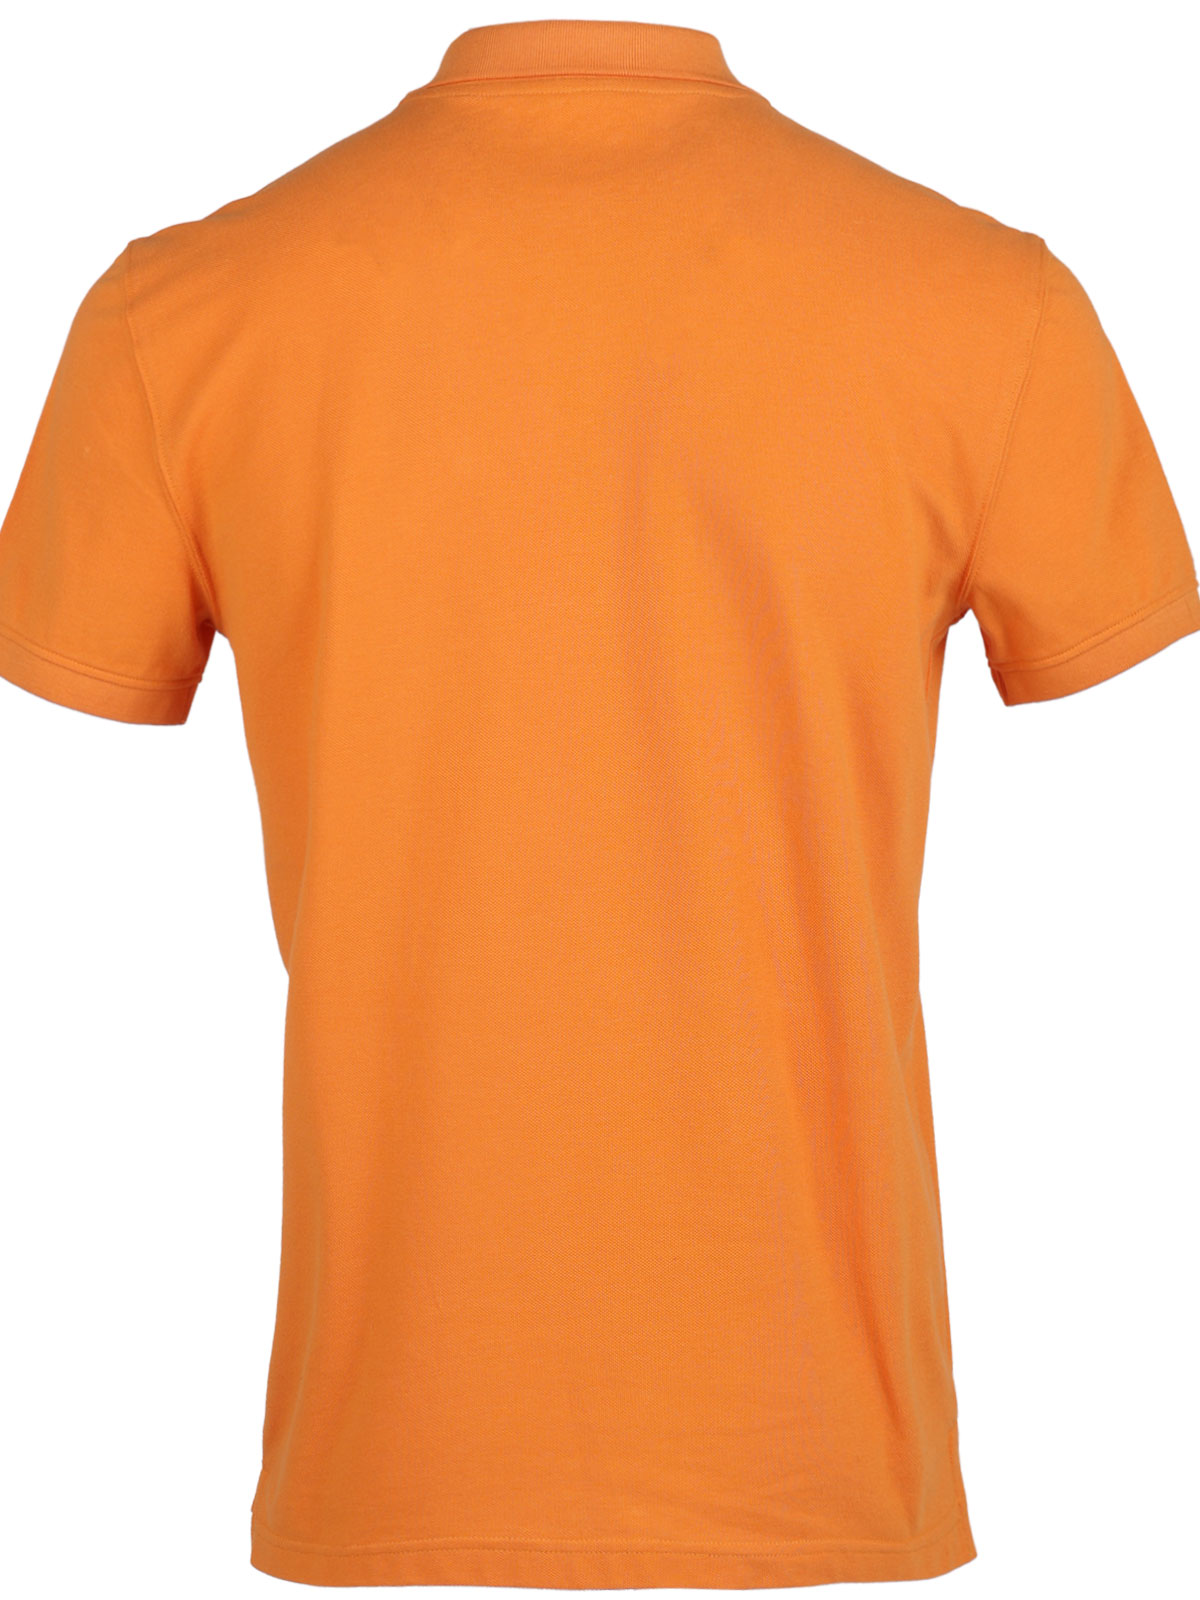 Tshirt in orange with a knitted collar - 93434 € 37.12 img2